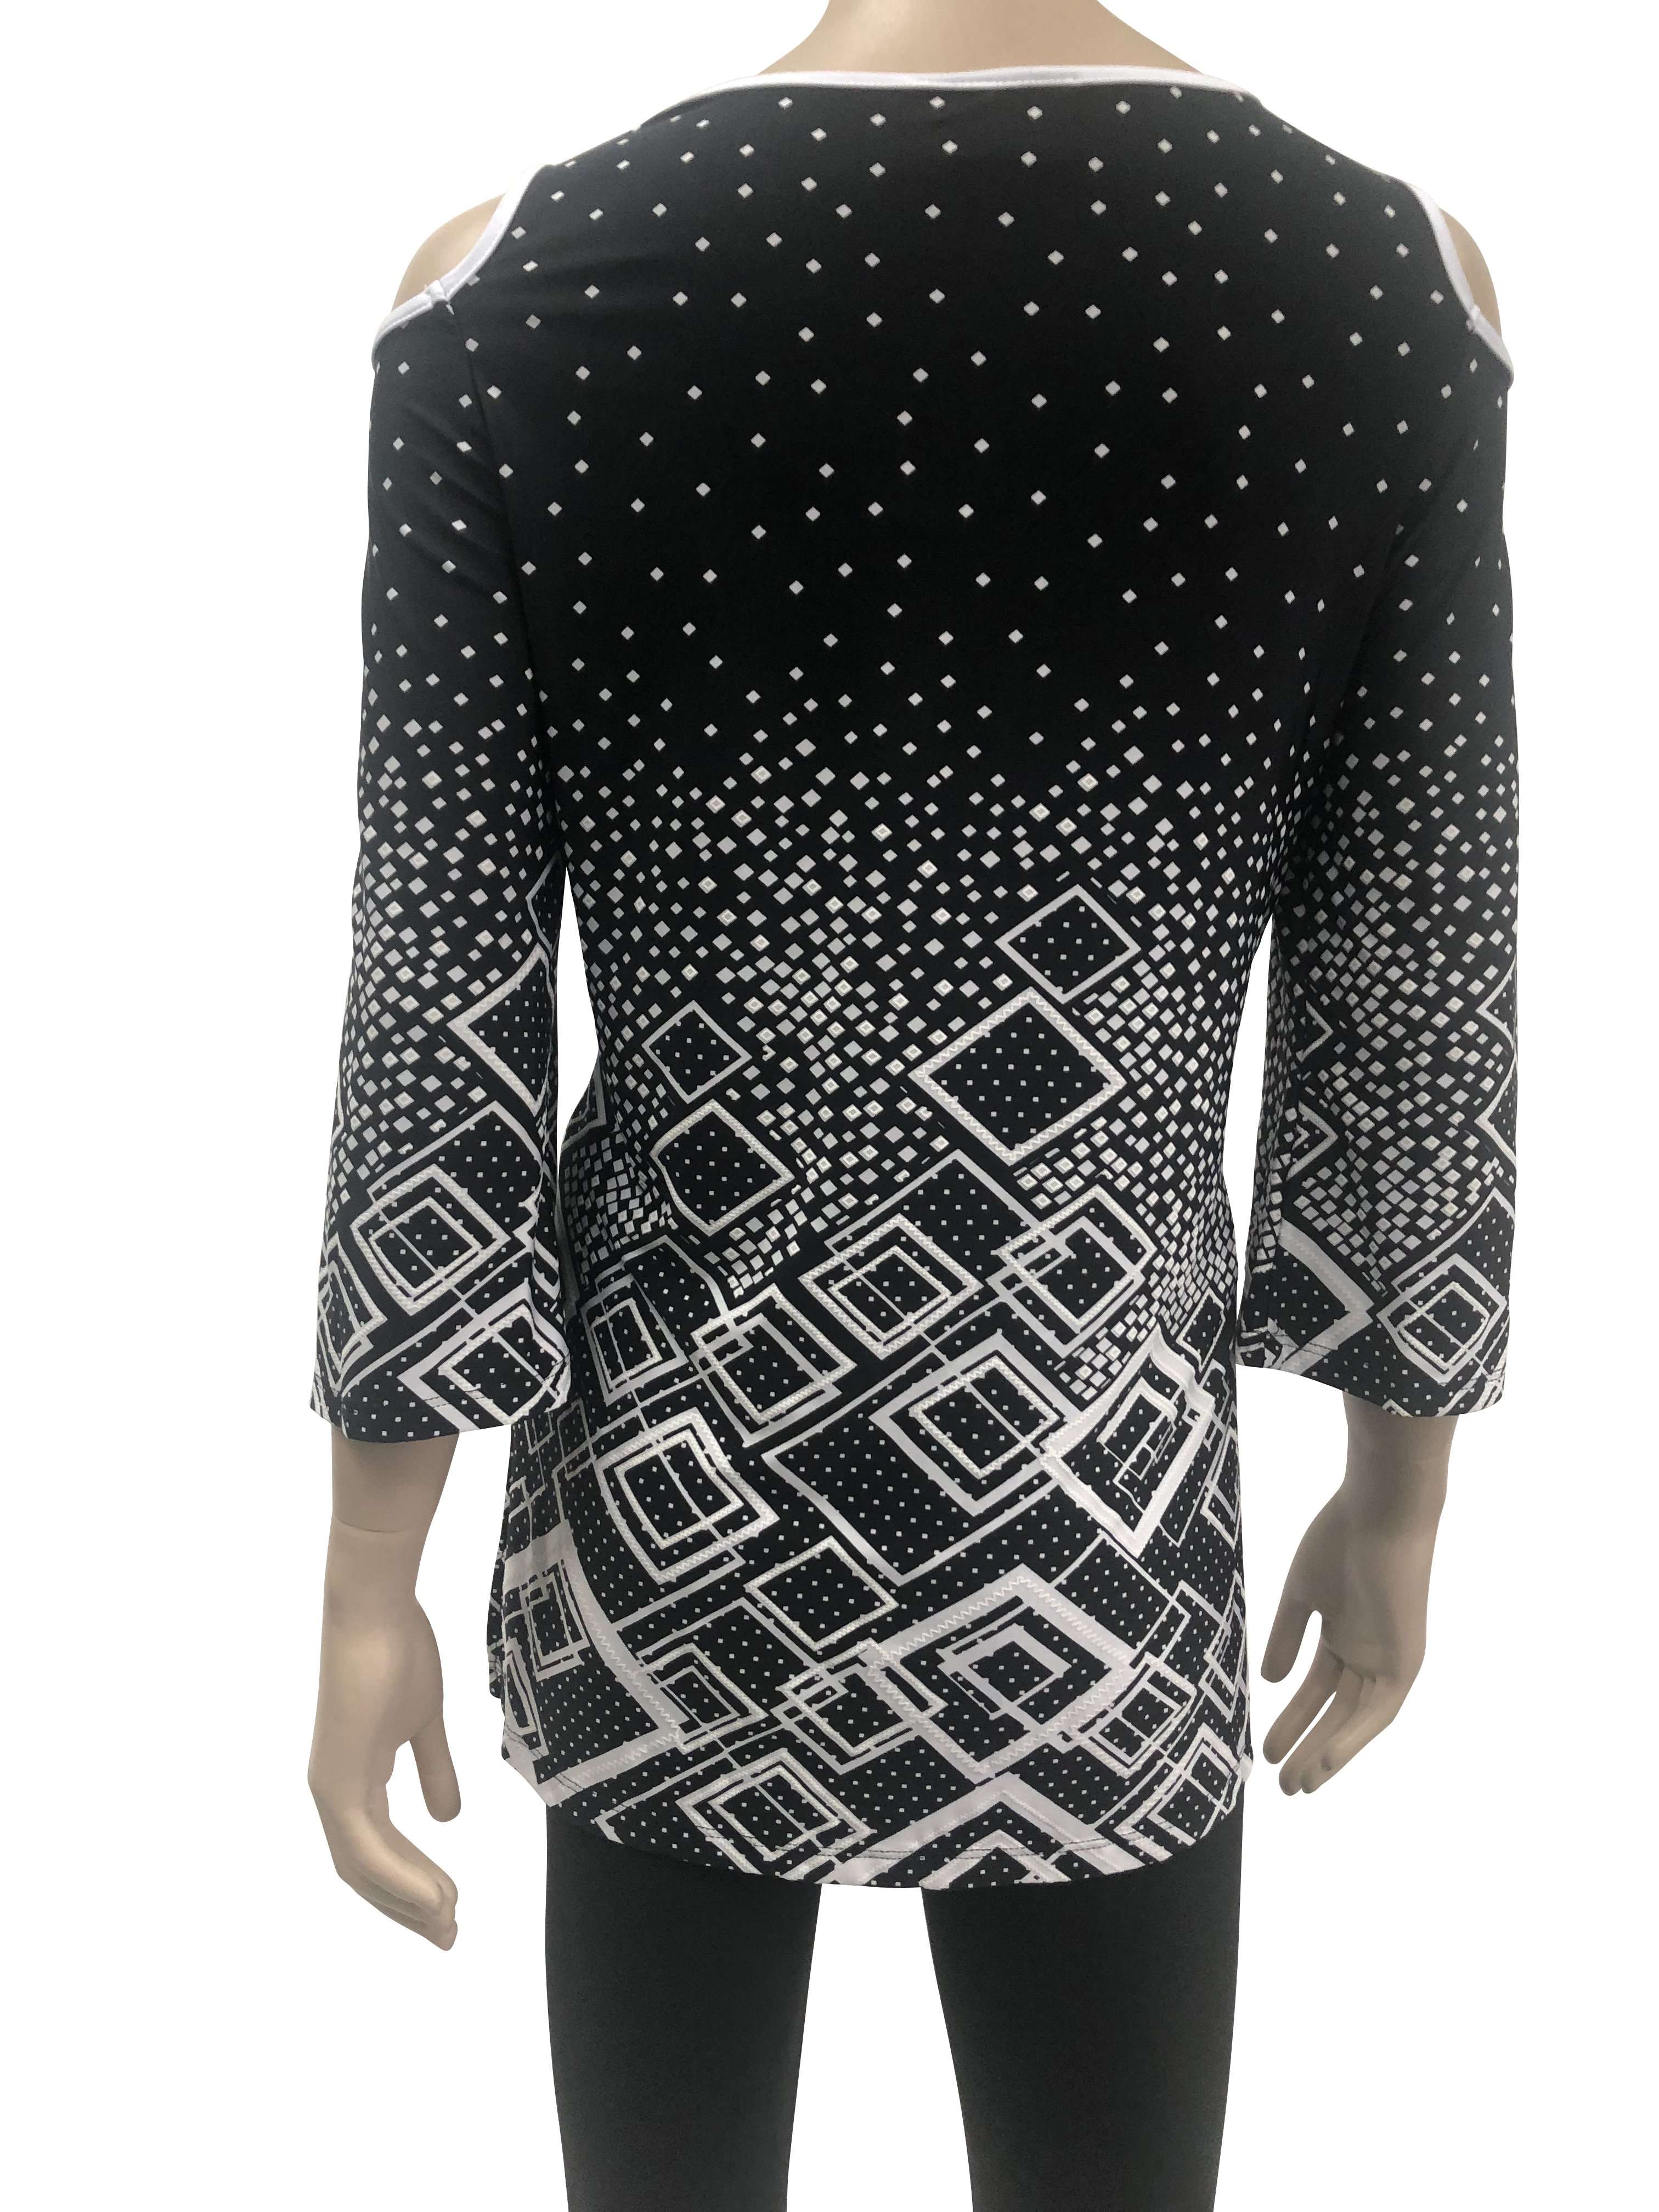 Women's Tops Large Sizes Quality Flattering Fit Black and White Stunning Print Made in Canada Yvonne Marie Boutiques - Yvonne Marie - Yvonne Marie